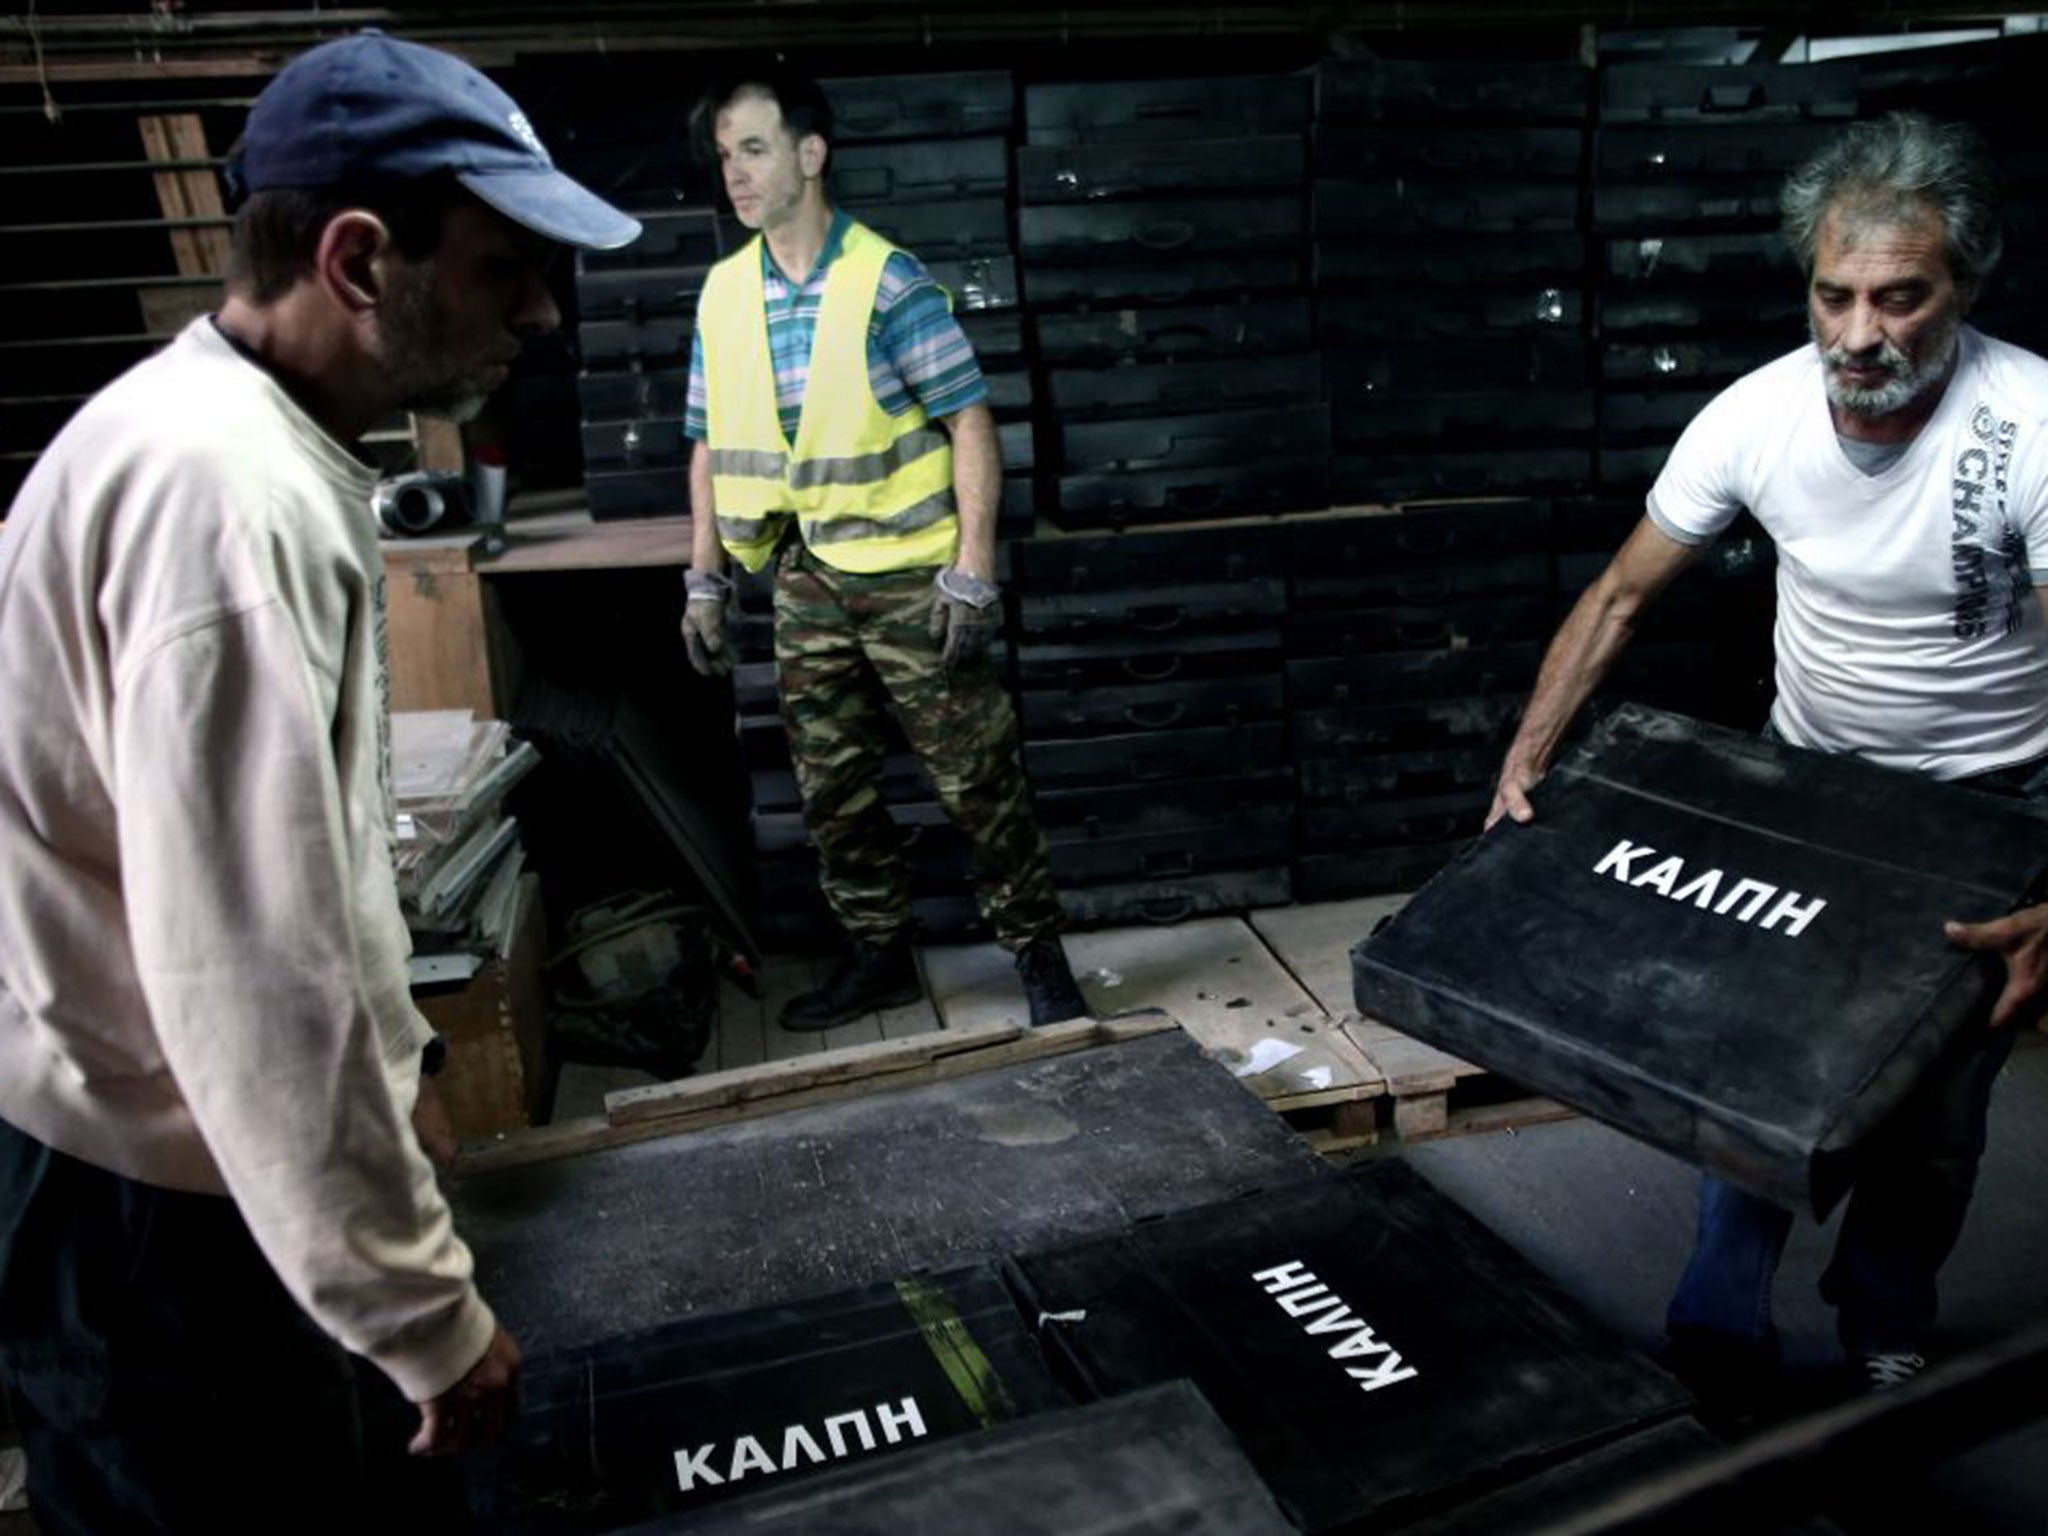 Municipal workers carry ballot boxes into a warehouse in Athens on July 2, 2015, in preparation for the upcoming referendum on austerity